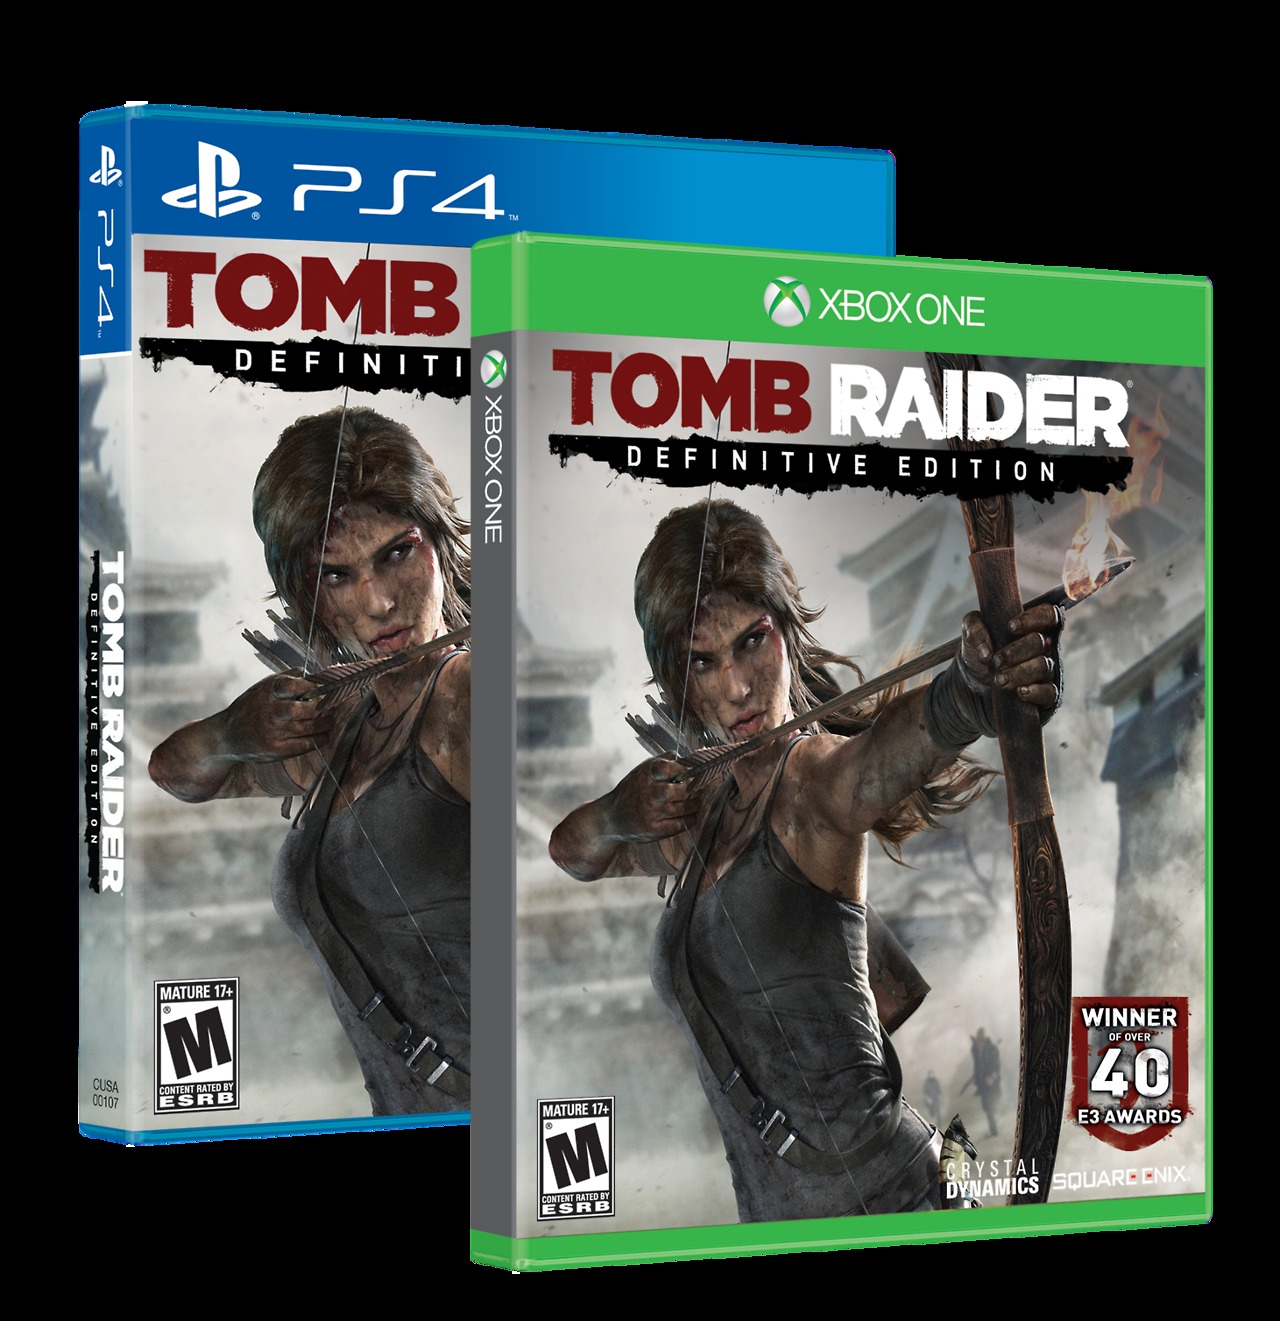 Media asset (photo, screenshot, or image in full size) related to contents posted at 3dfxzone.it | Image Name: news20450-Tomb-Raider-Definitive-Edition_5.png